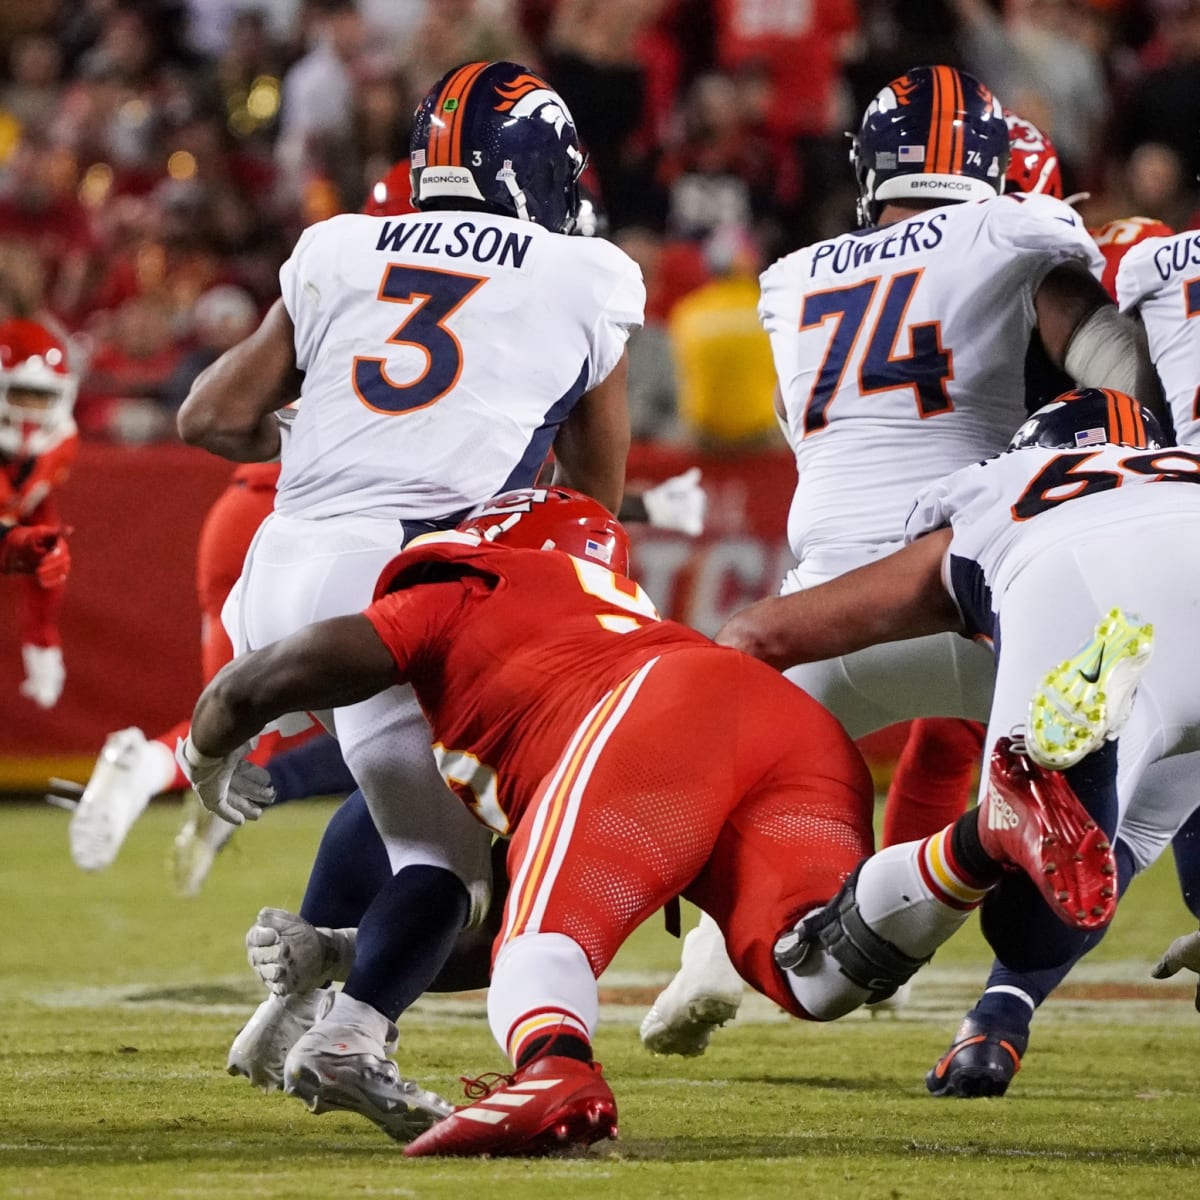 Wilson sacked 6 times, picked off late as Denver loses again